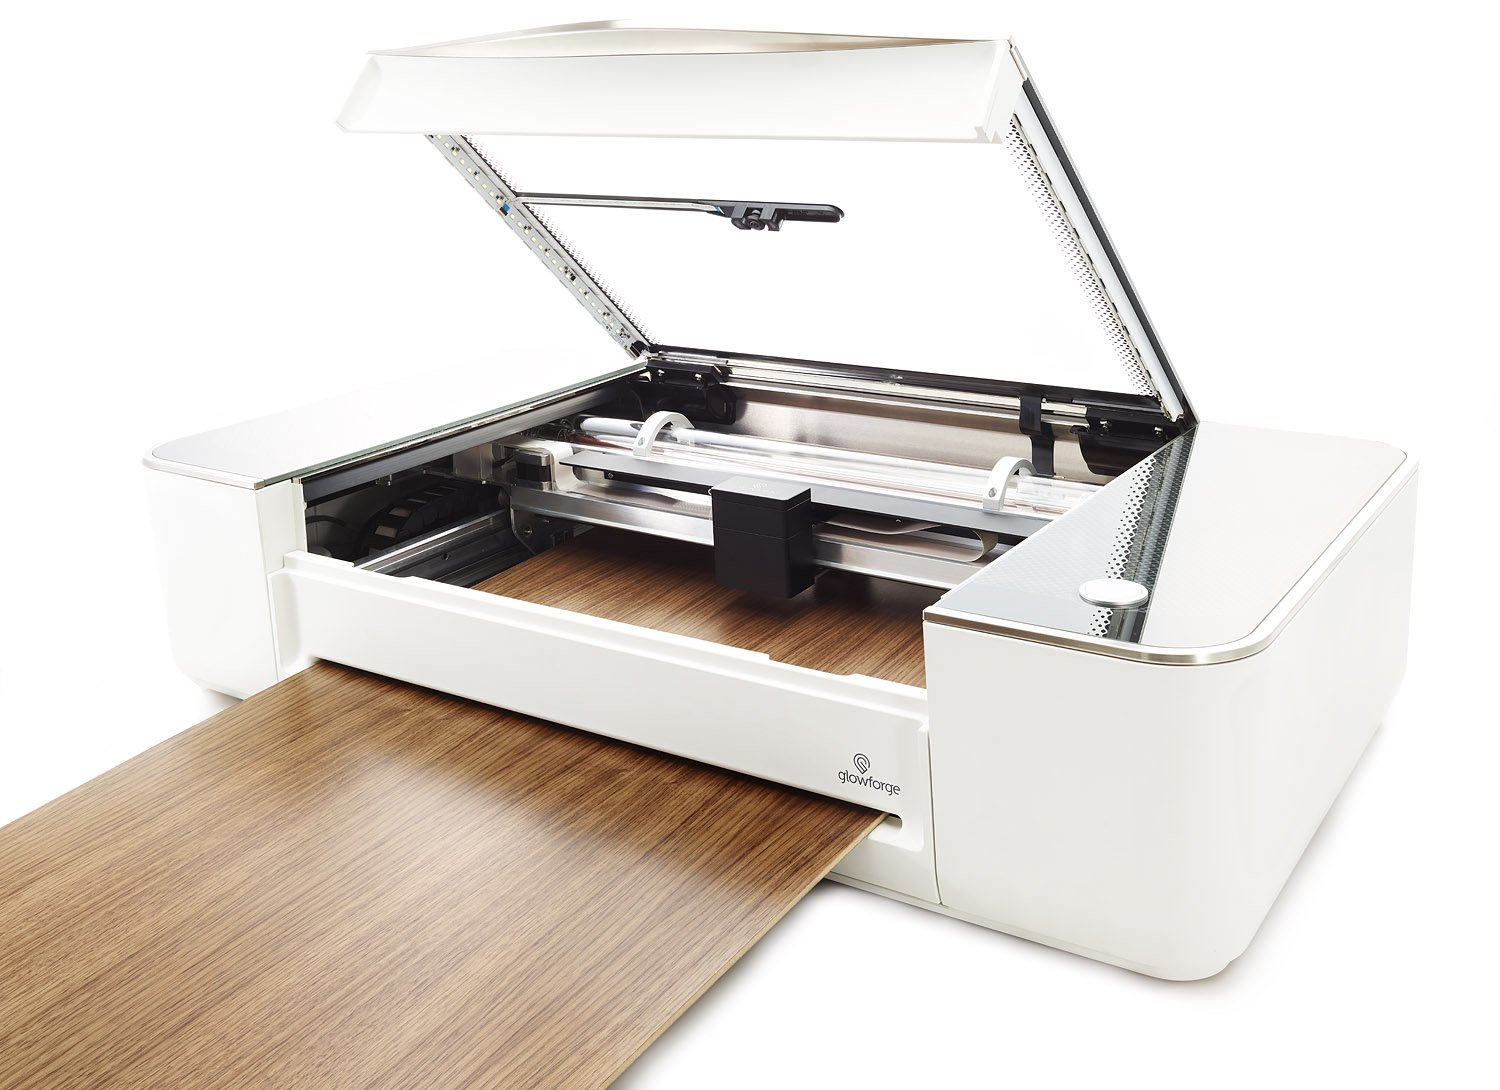 Glowforge's home 3D laser printer is now available to the public